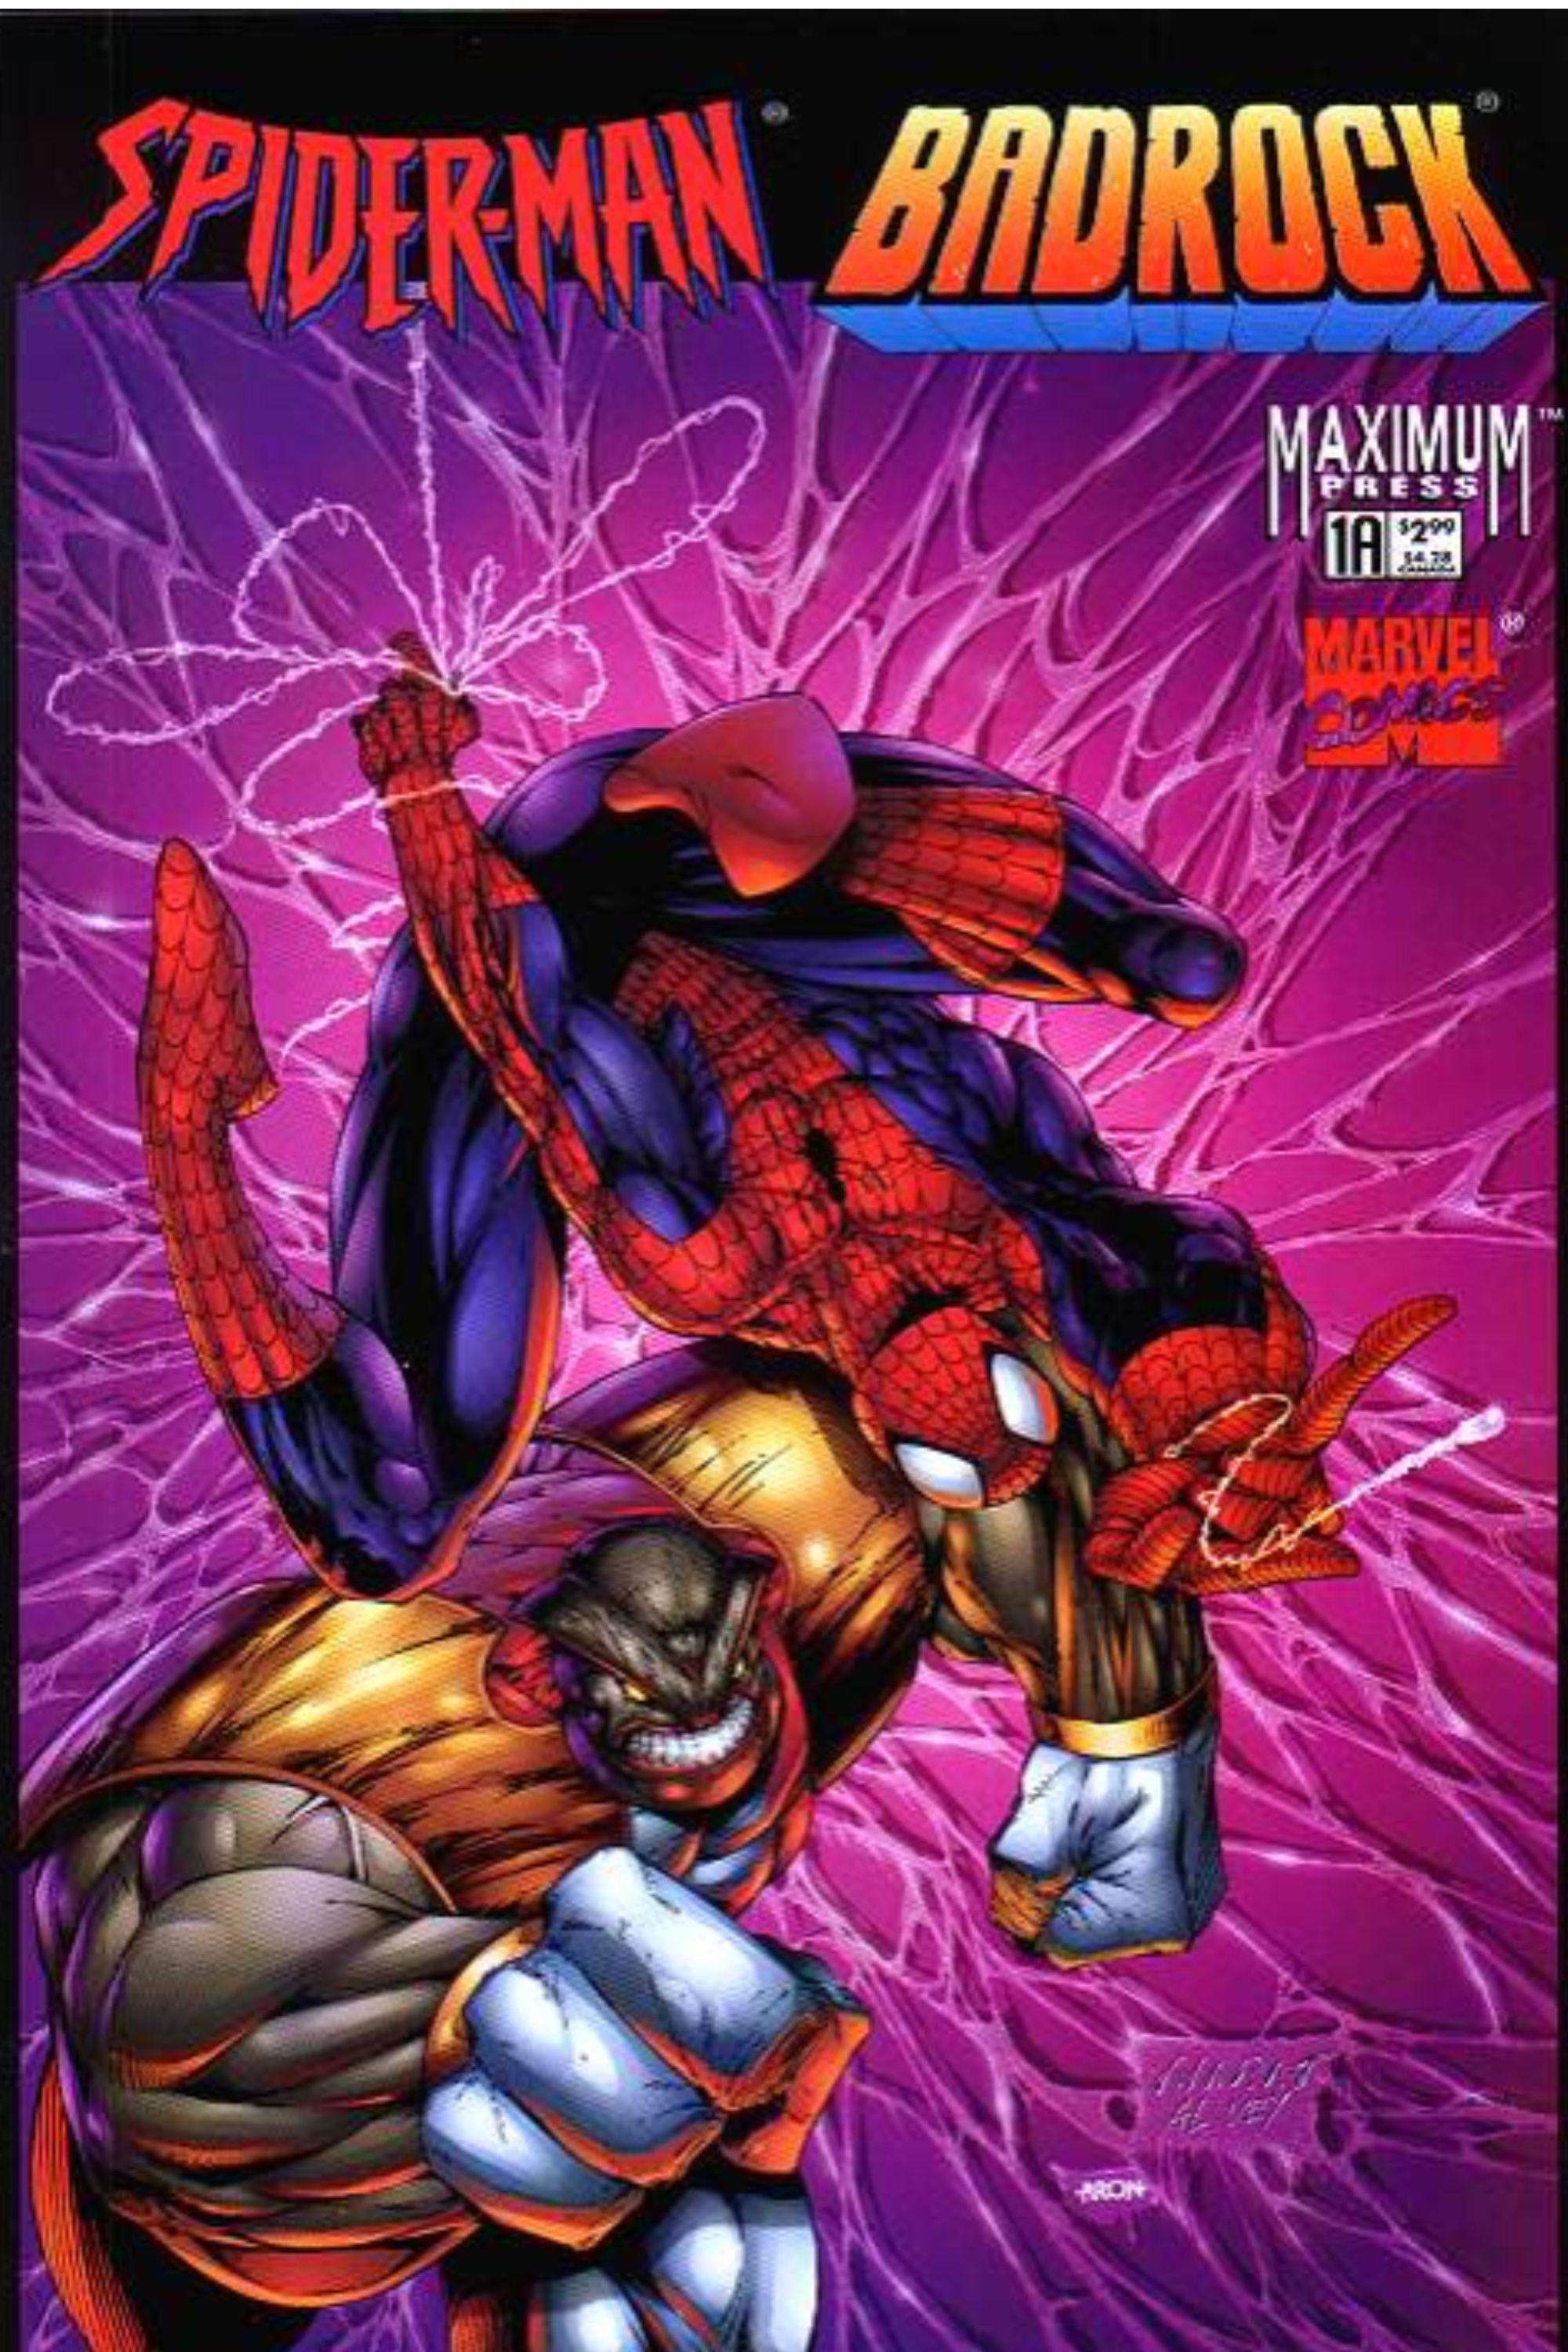 Spiderman fighting Badrock in front of a purple background In Spider-Man/Badrock